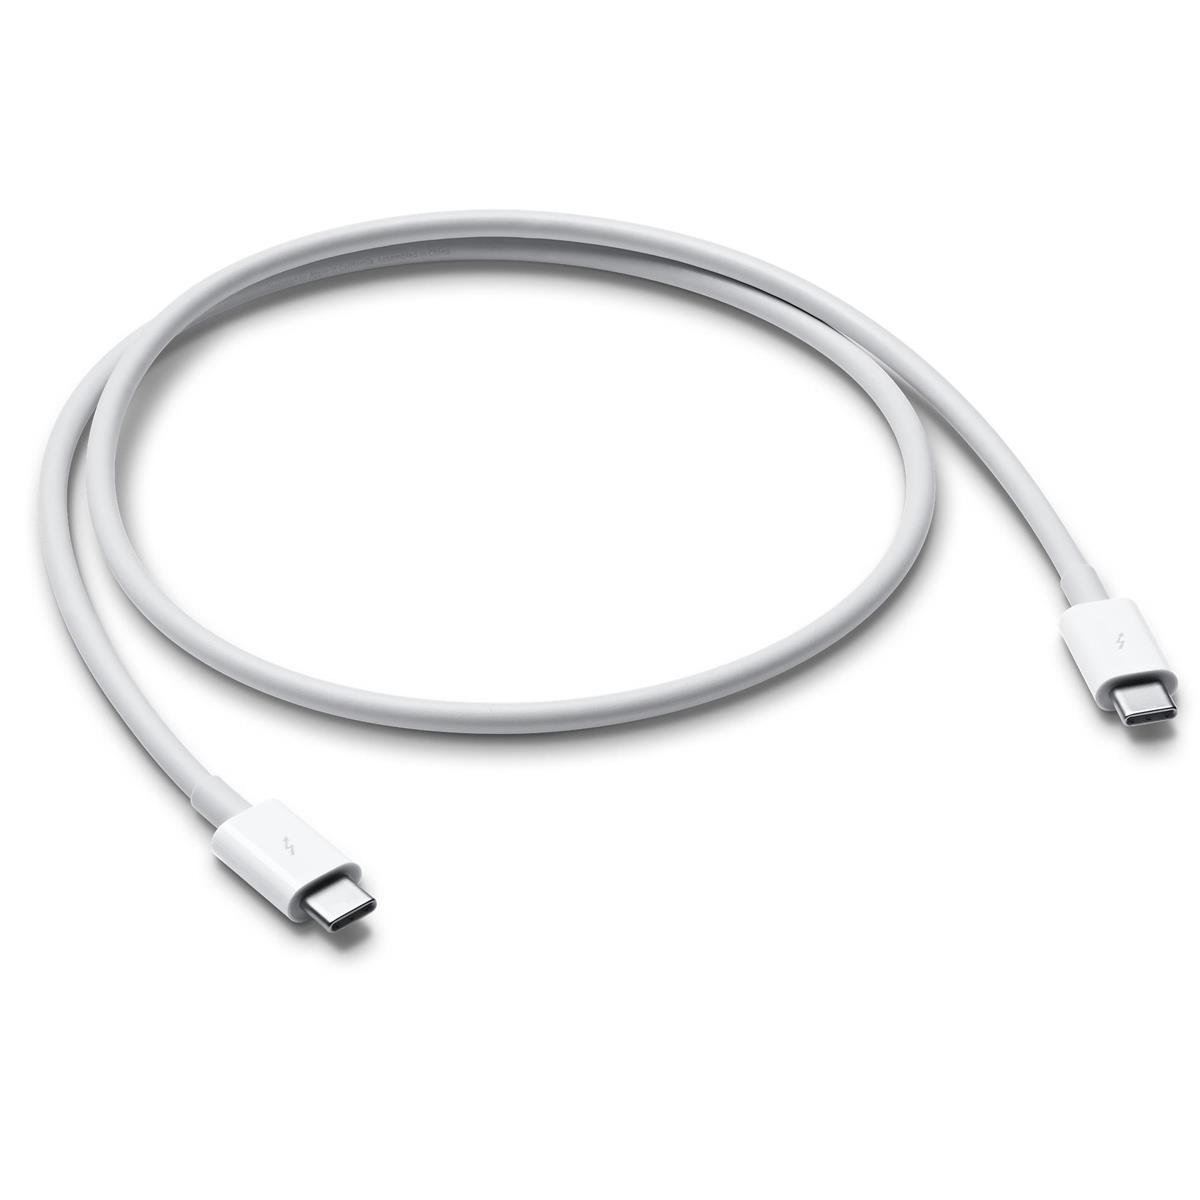 Image of Apple 2.6' Thunderbolt 3 (USB-C) Cable